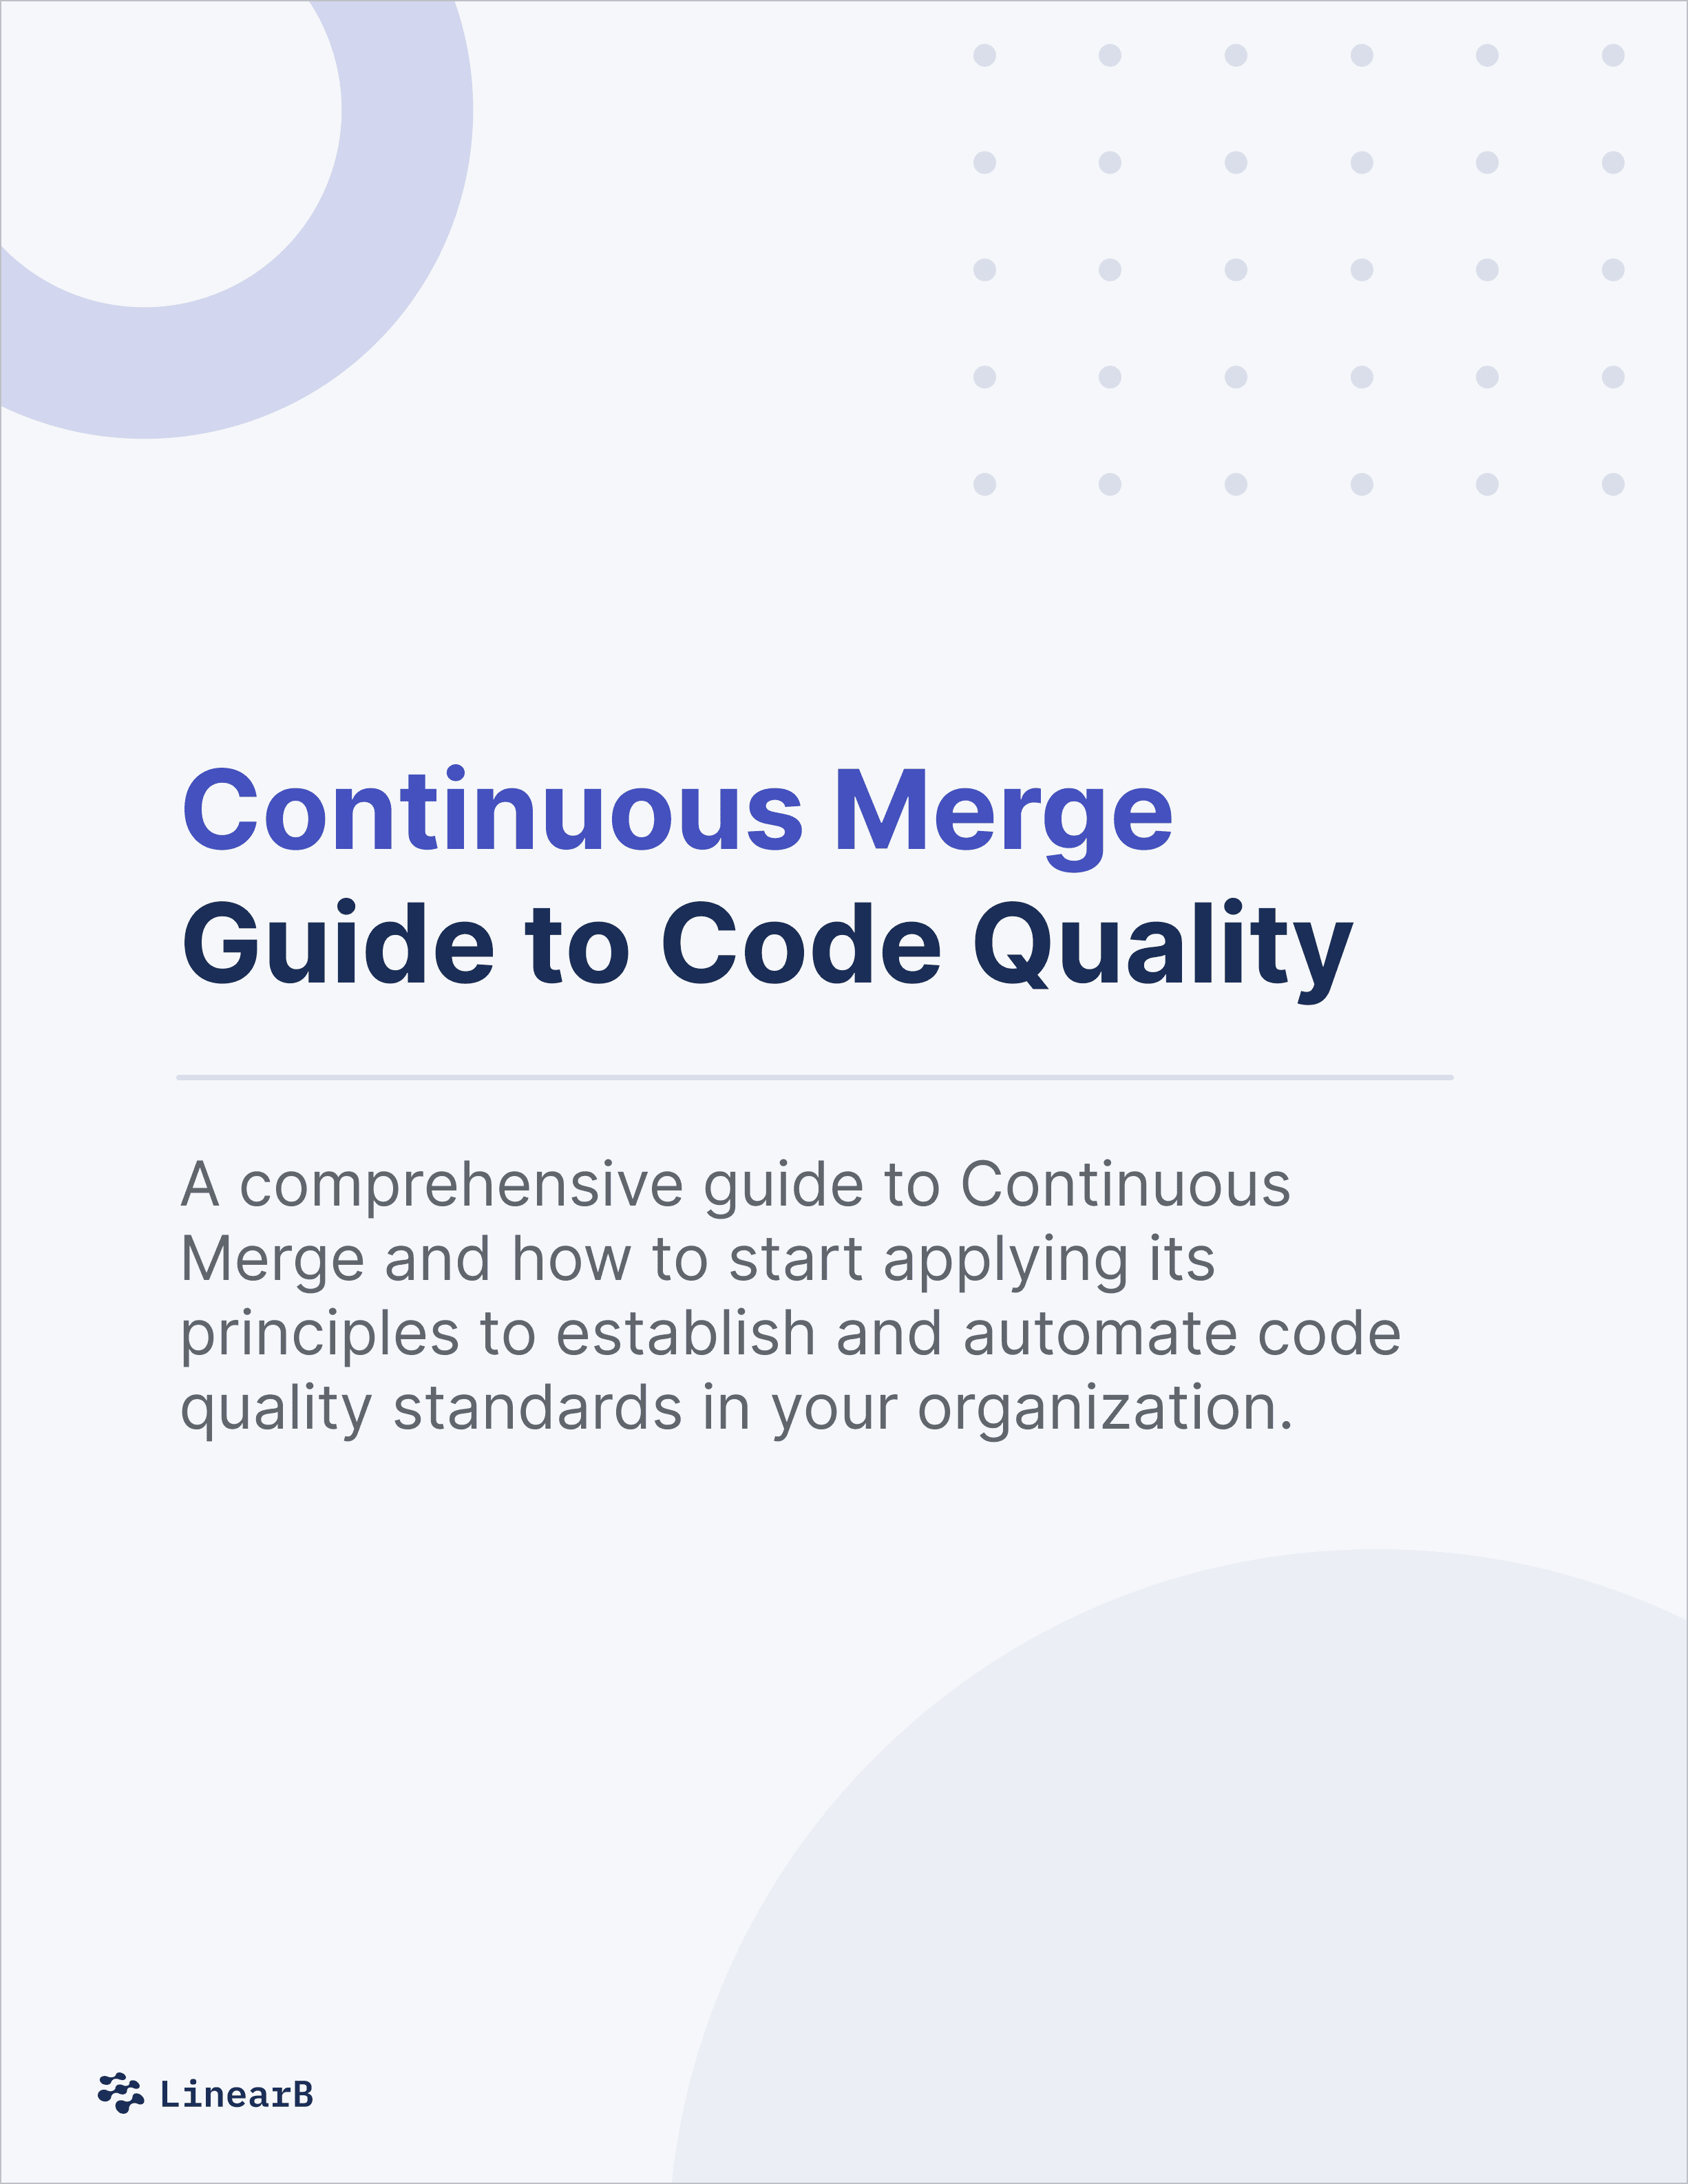 Continuous Merge Guide to Code Quality